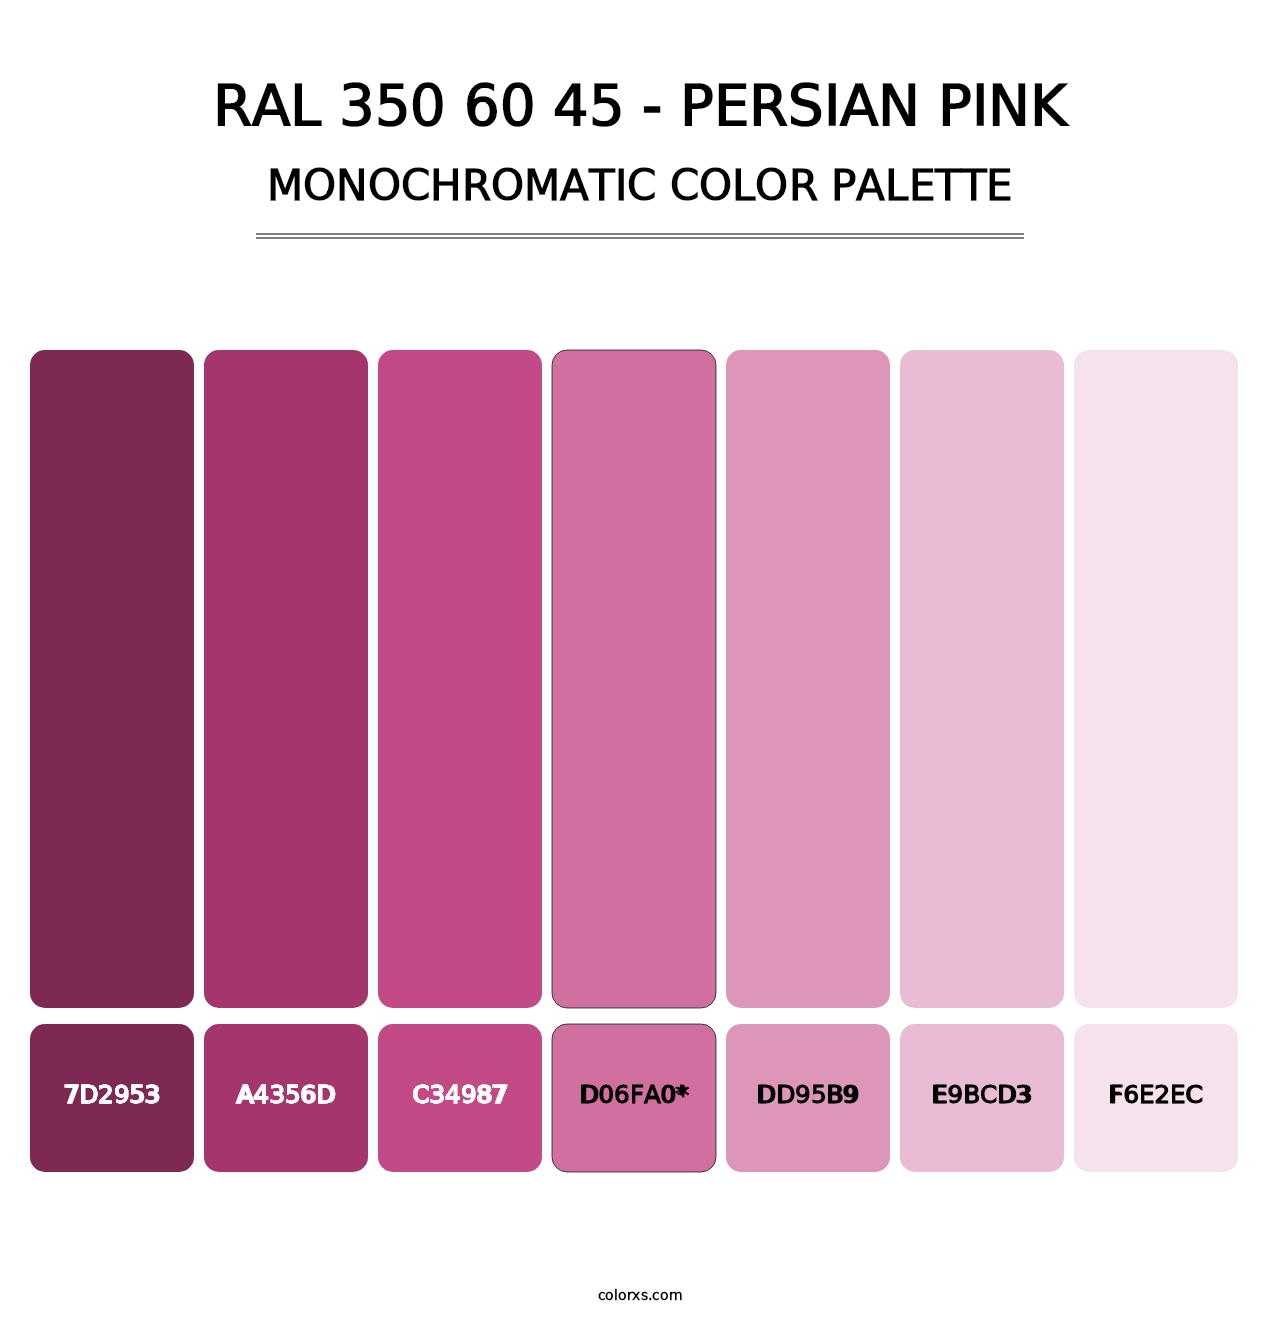 RAL 350 60 45 - Persian Pink - Monochromatic Color Palette